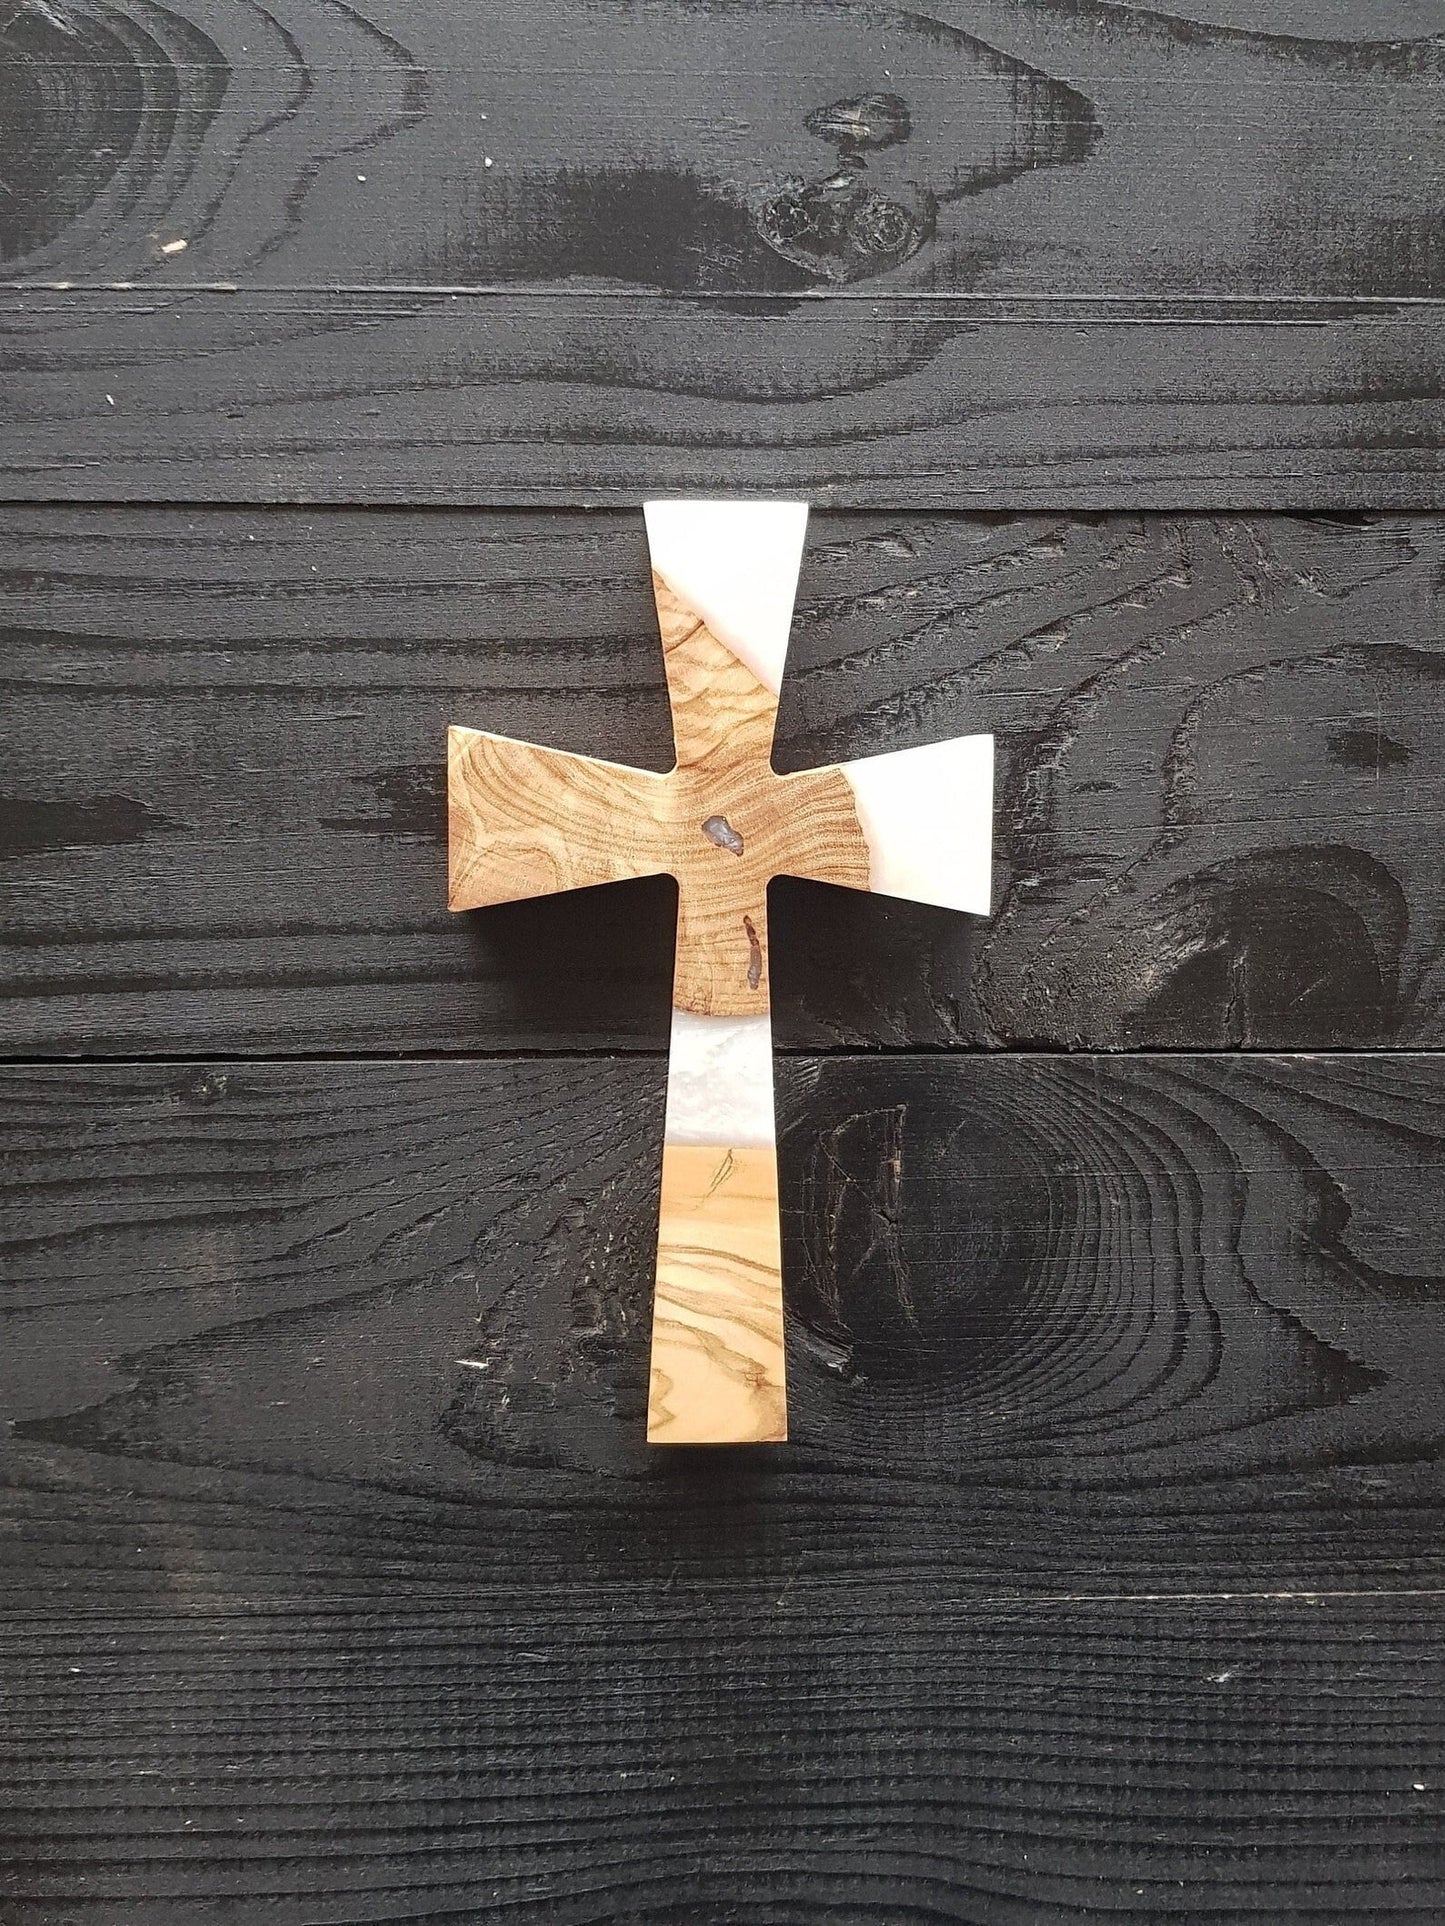 Custom Made Resin and Olive Wood Wall Cross, Wooden Wall Cross, Large wooden Wall Cross, Wall Crucifix, House and Church Gift